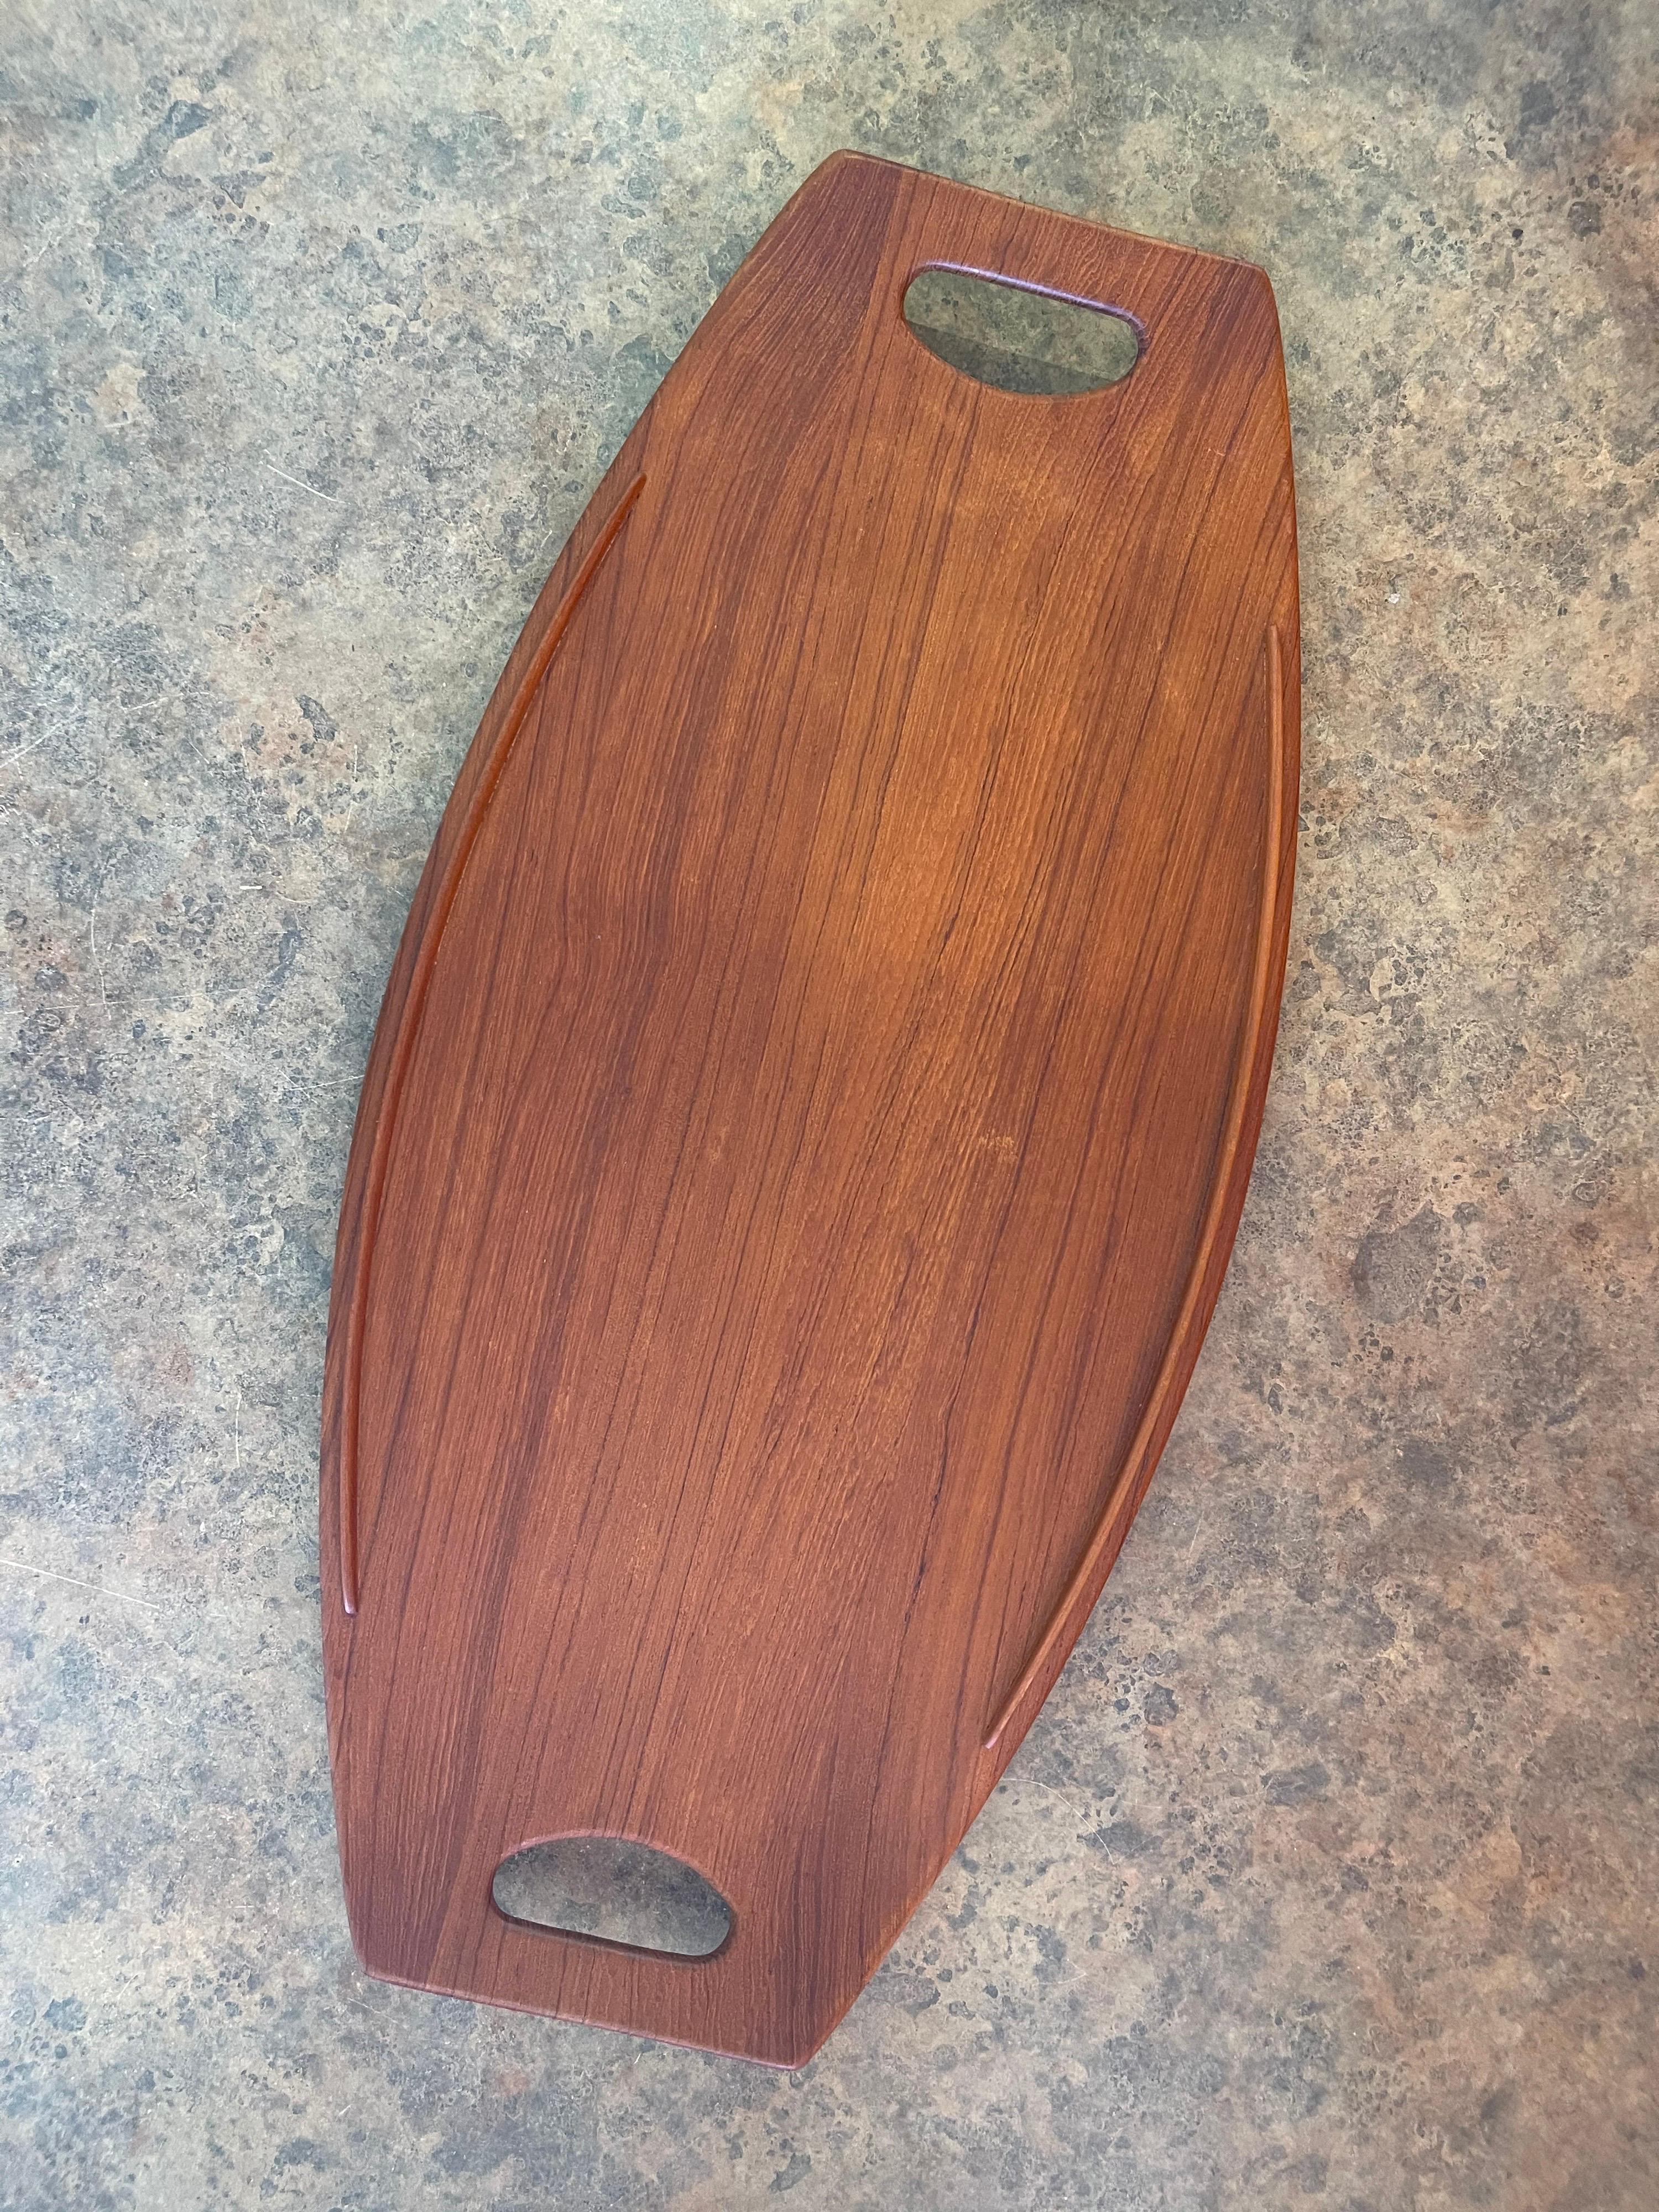 Beautiful large teak gondola tray by Jens Quistgaard for Dansk, circa 1950s (early production). Original condition with raised edges and elegant lines; the tray measures is 23.5